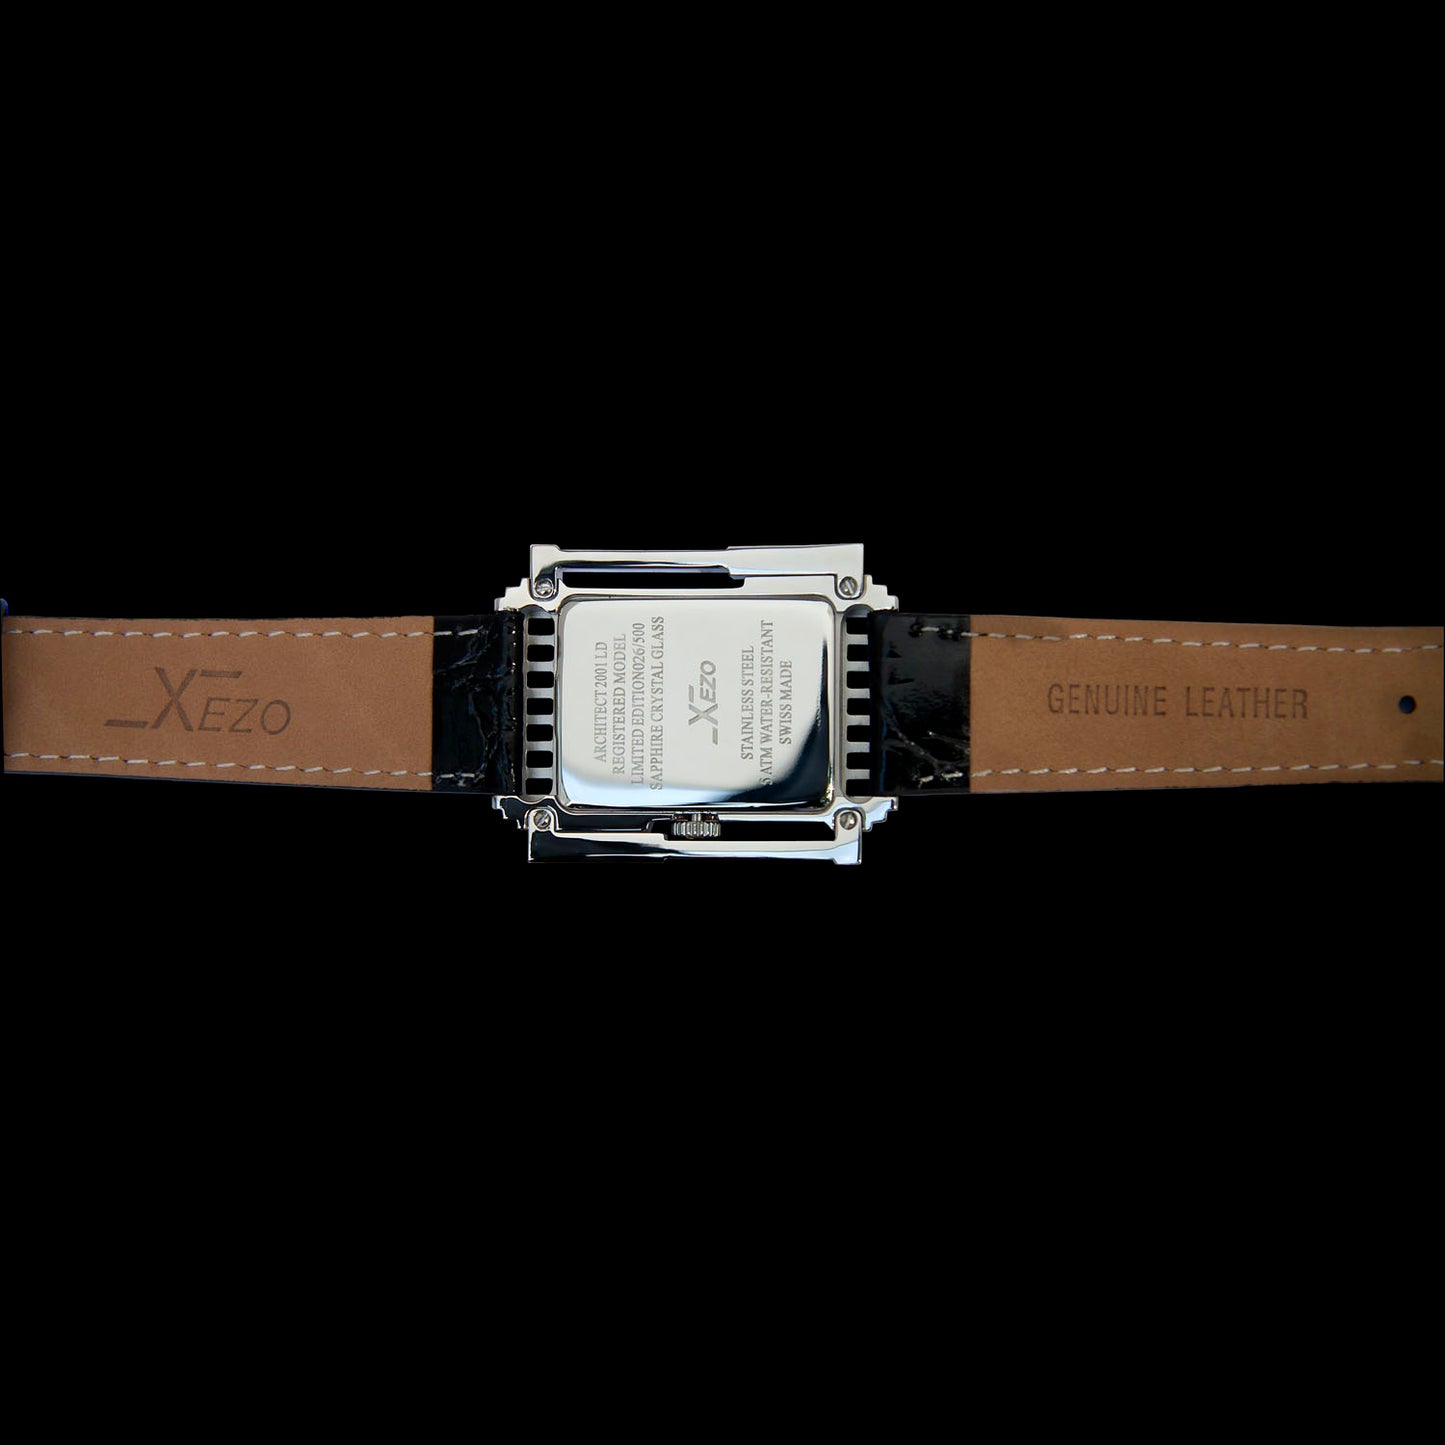 Xezo - Overview of the back of the Architect 2001 LD Tank watch with leather strap